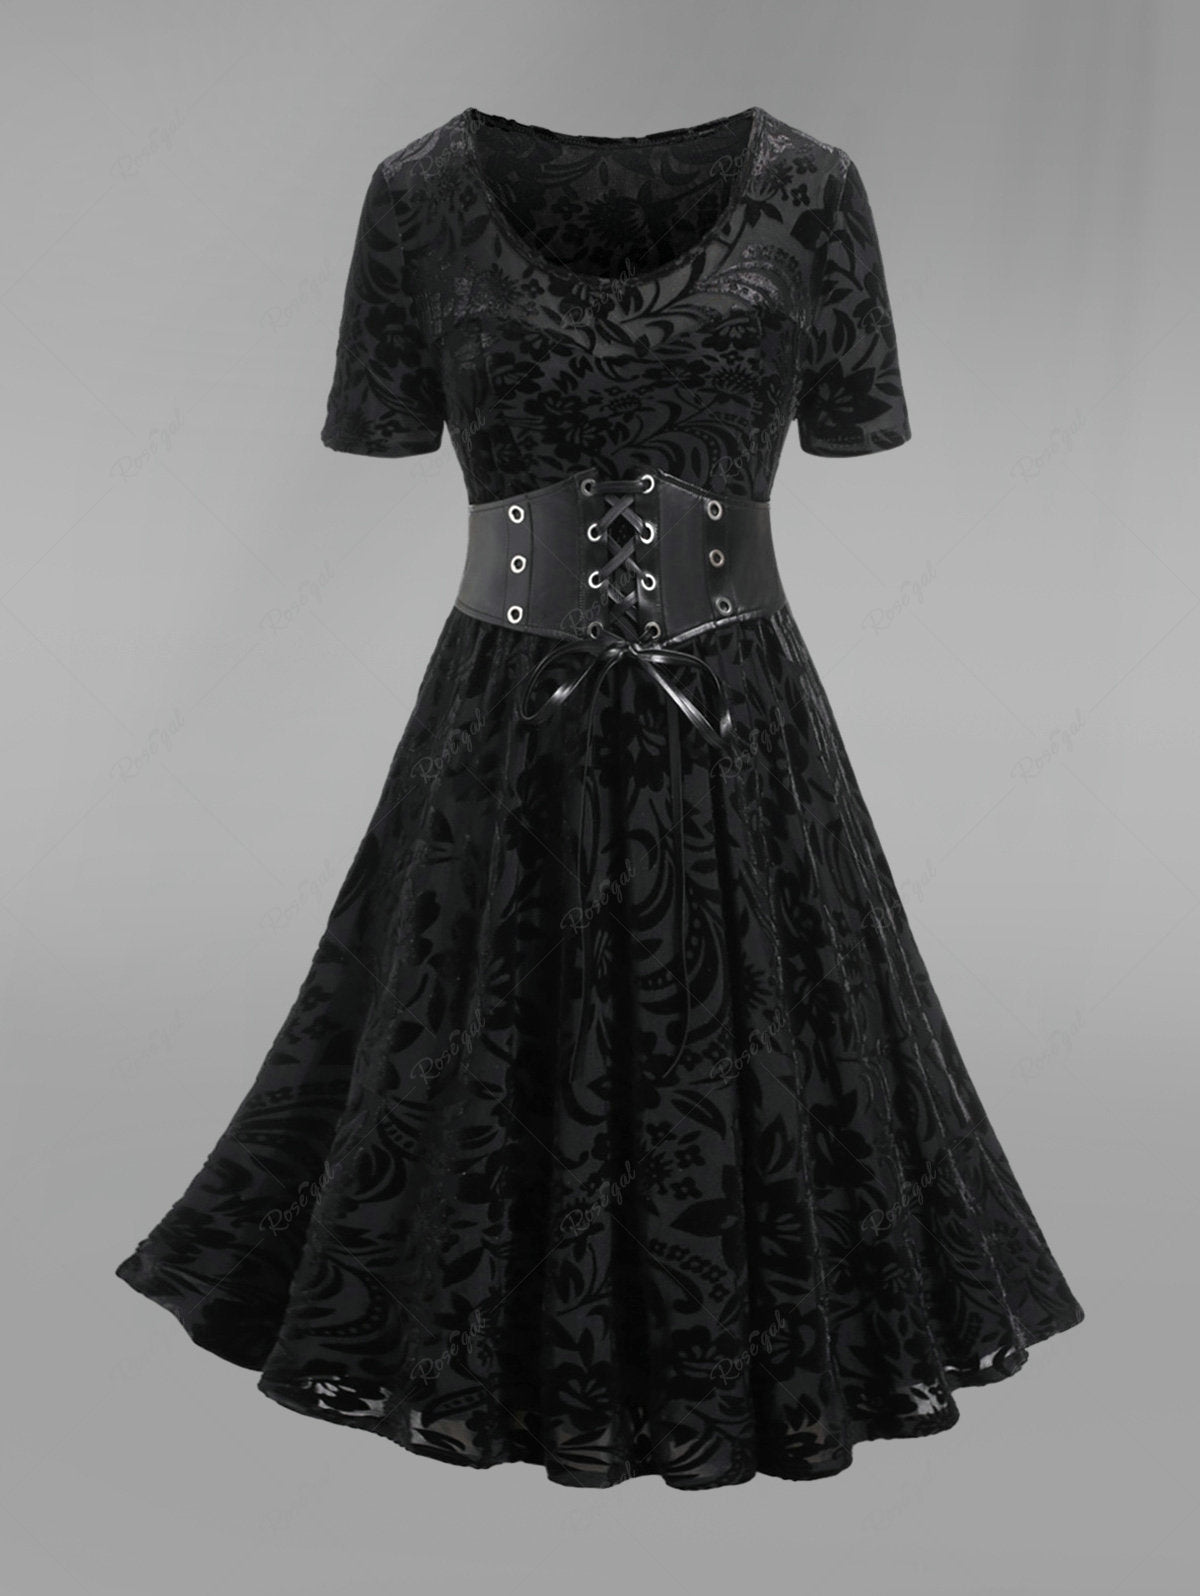 💗Lilith Loves💗 Victorian Gothic Jacquard PU Grommets Lace-up Corset Dress